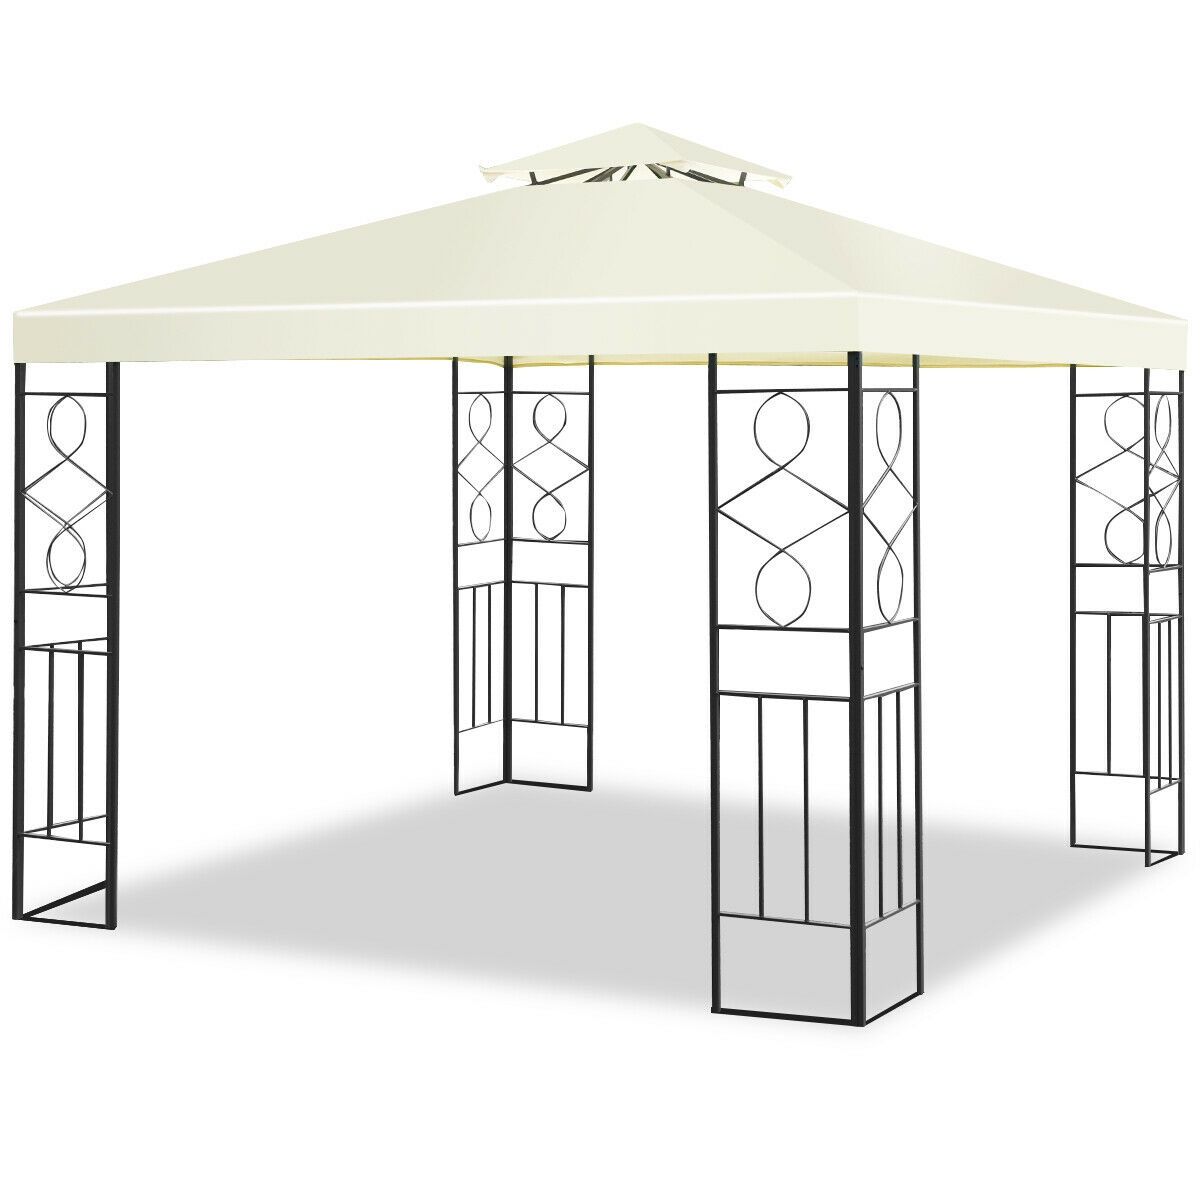 10'x10' Outdoor Patio Gazebo Canopy Tent With Steel Frame Shelter